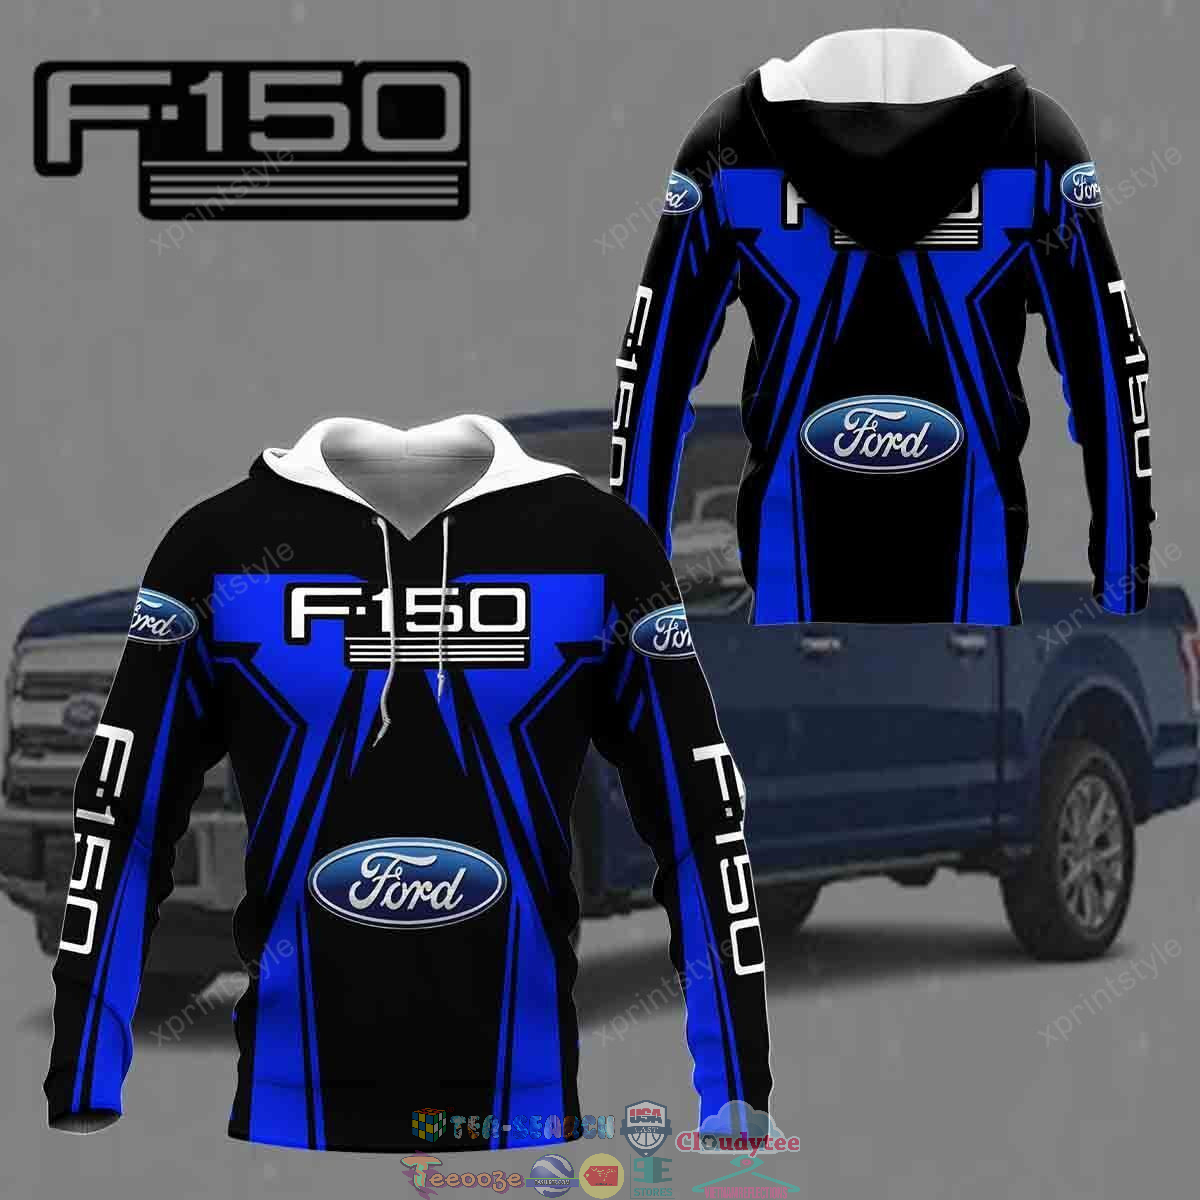 Ford F150 ver 9 hoodie and t-shirt – Saleoff